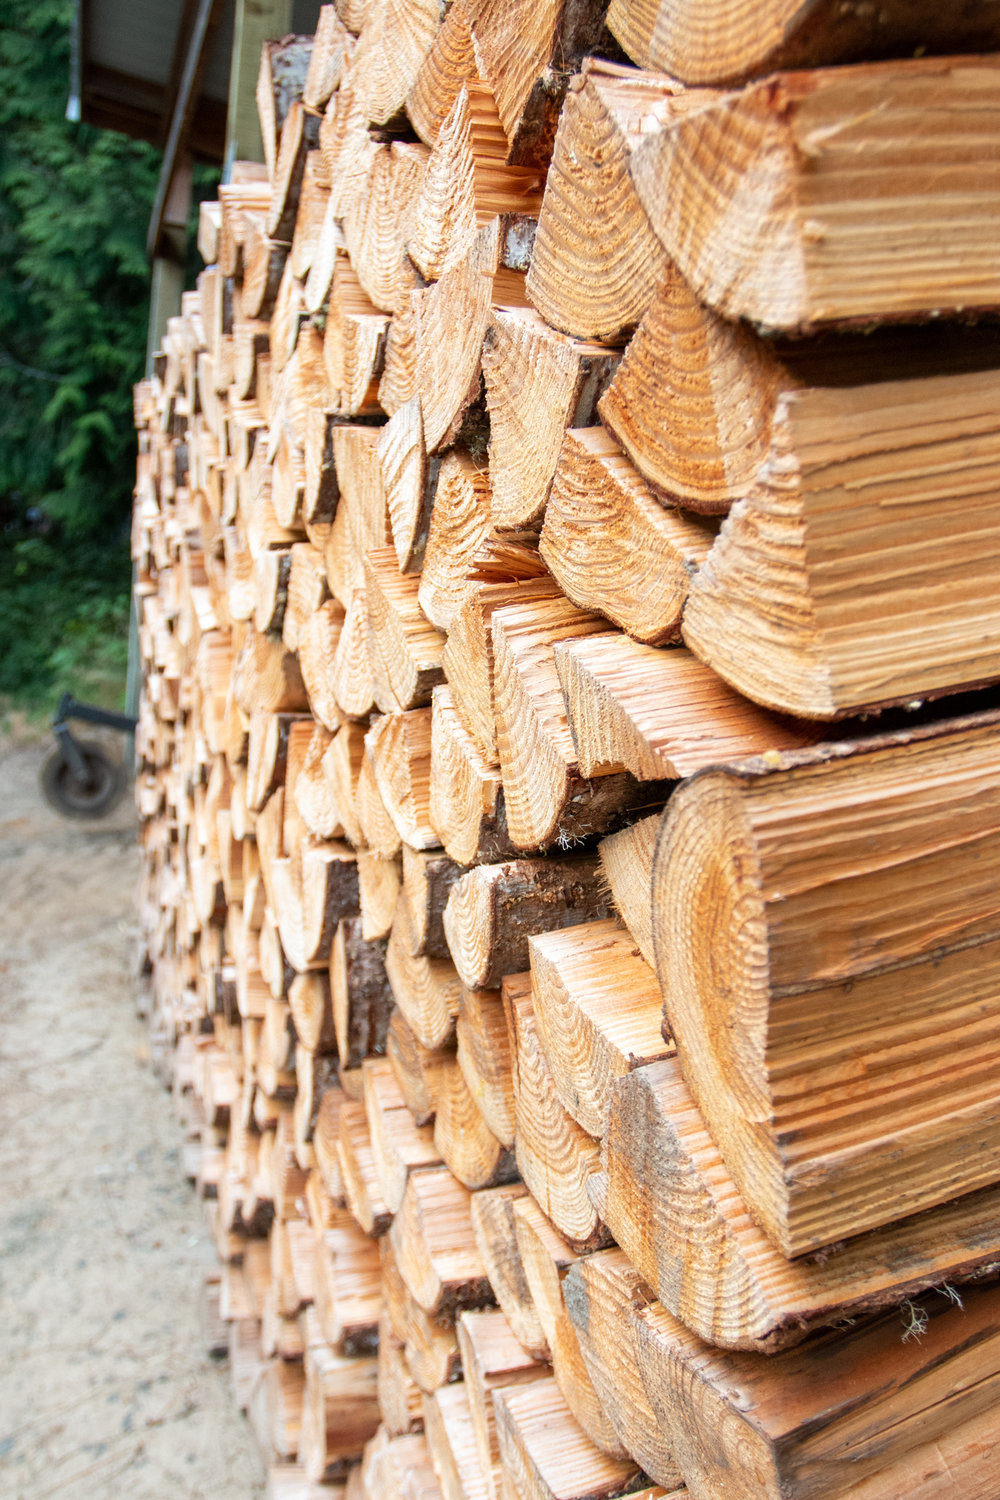 A stack on cut firewood at the Michigan Hill Farm on Salzer Valley Road.